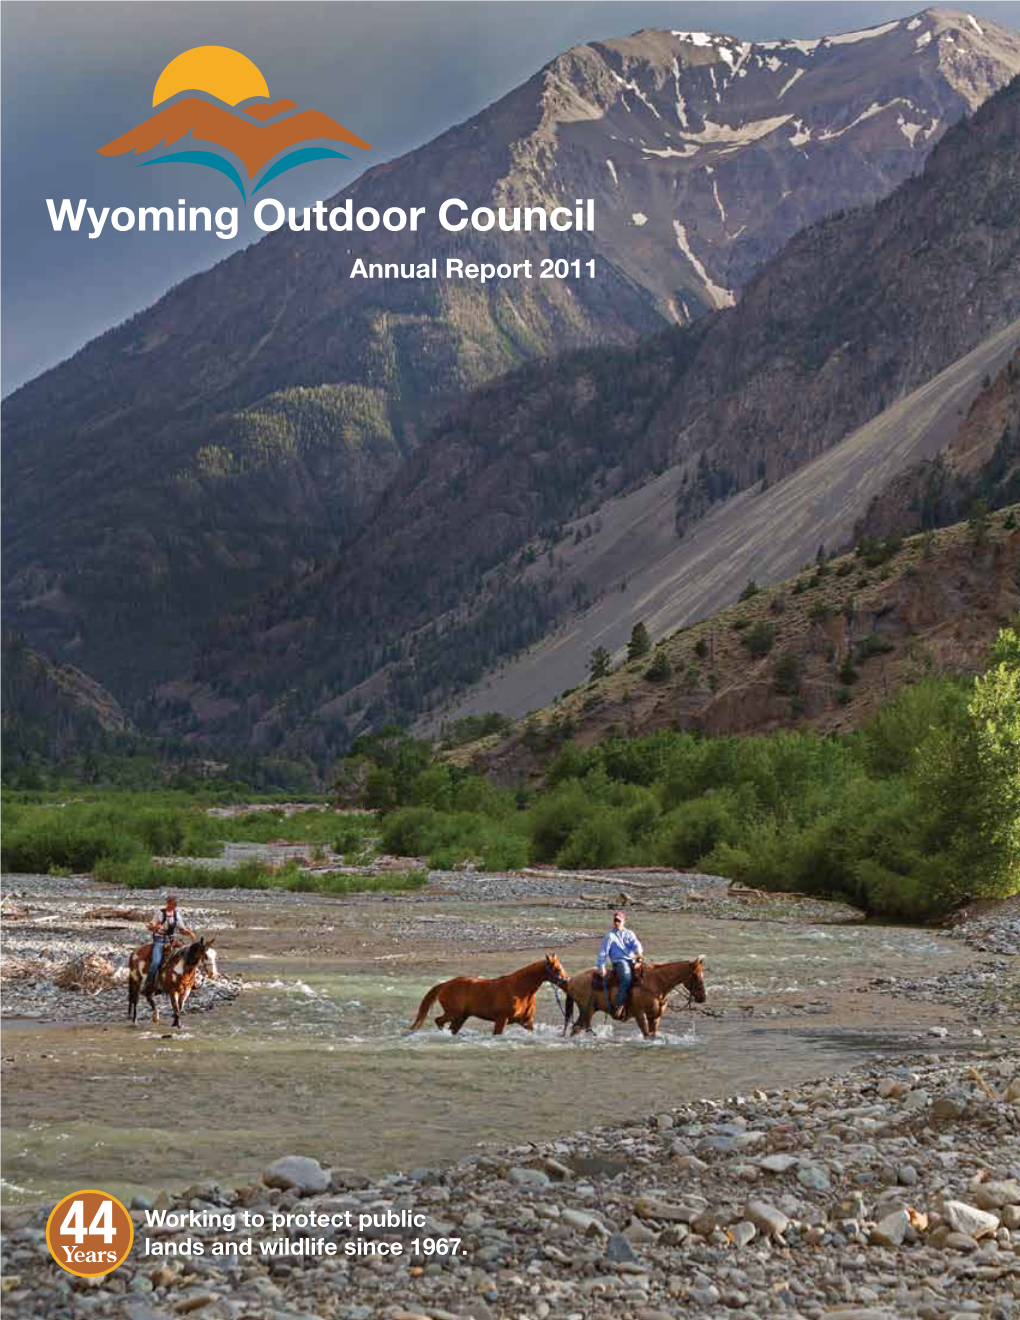 2011 Annual Report Dear Members of the Wyoming Outdoor Council